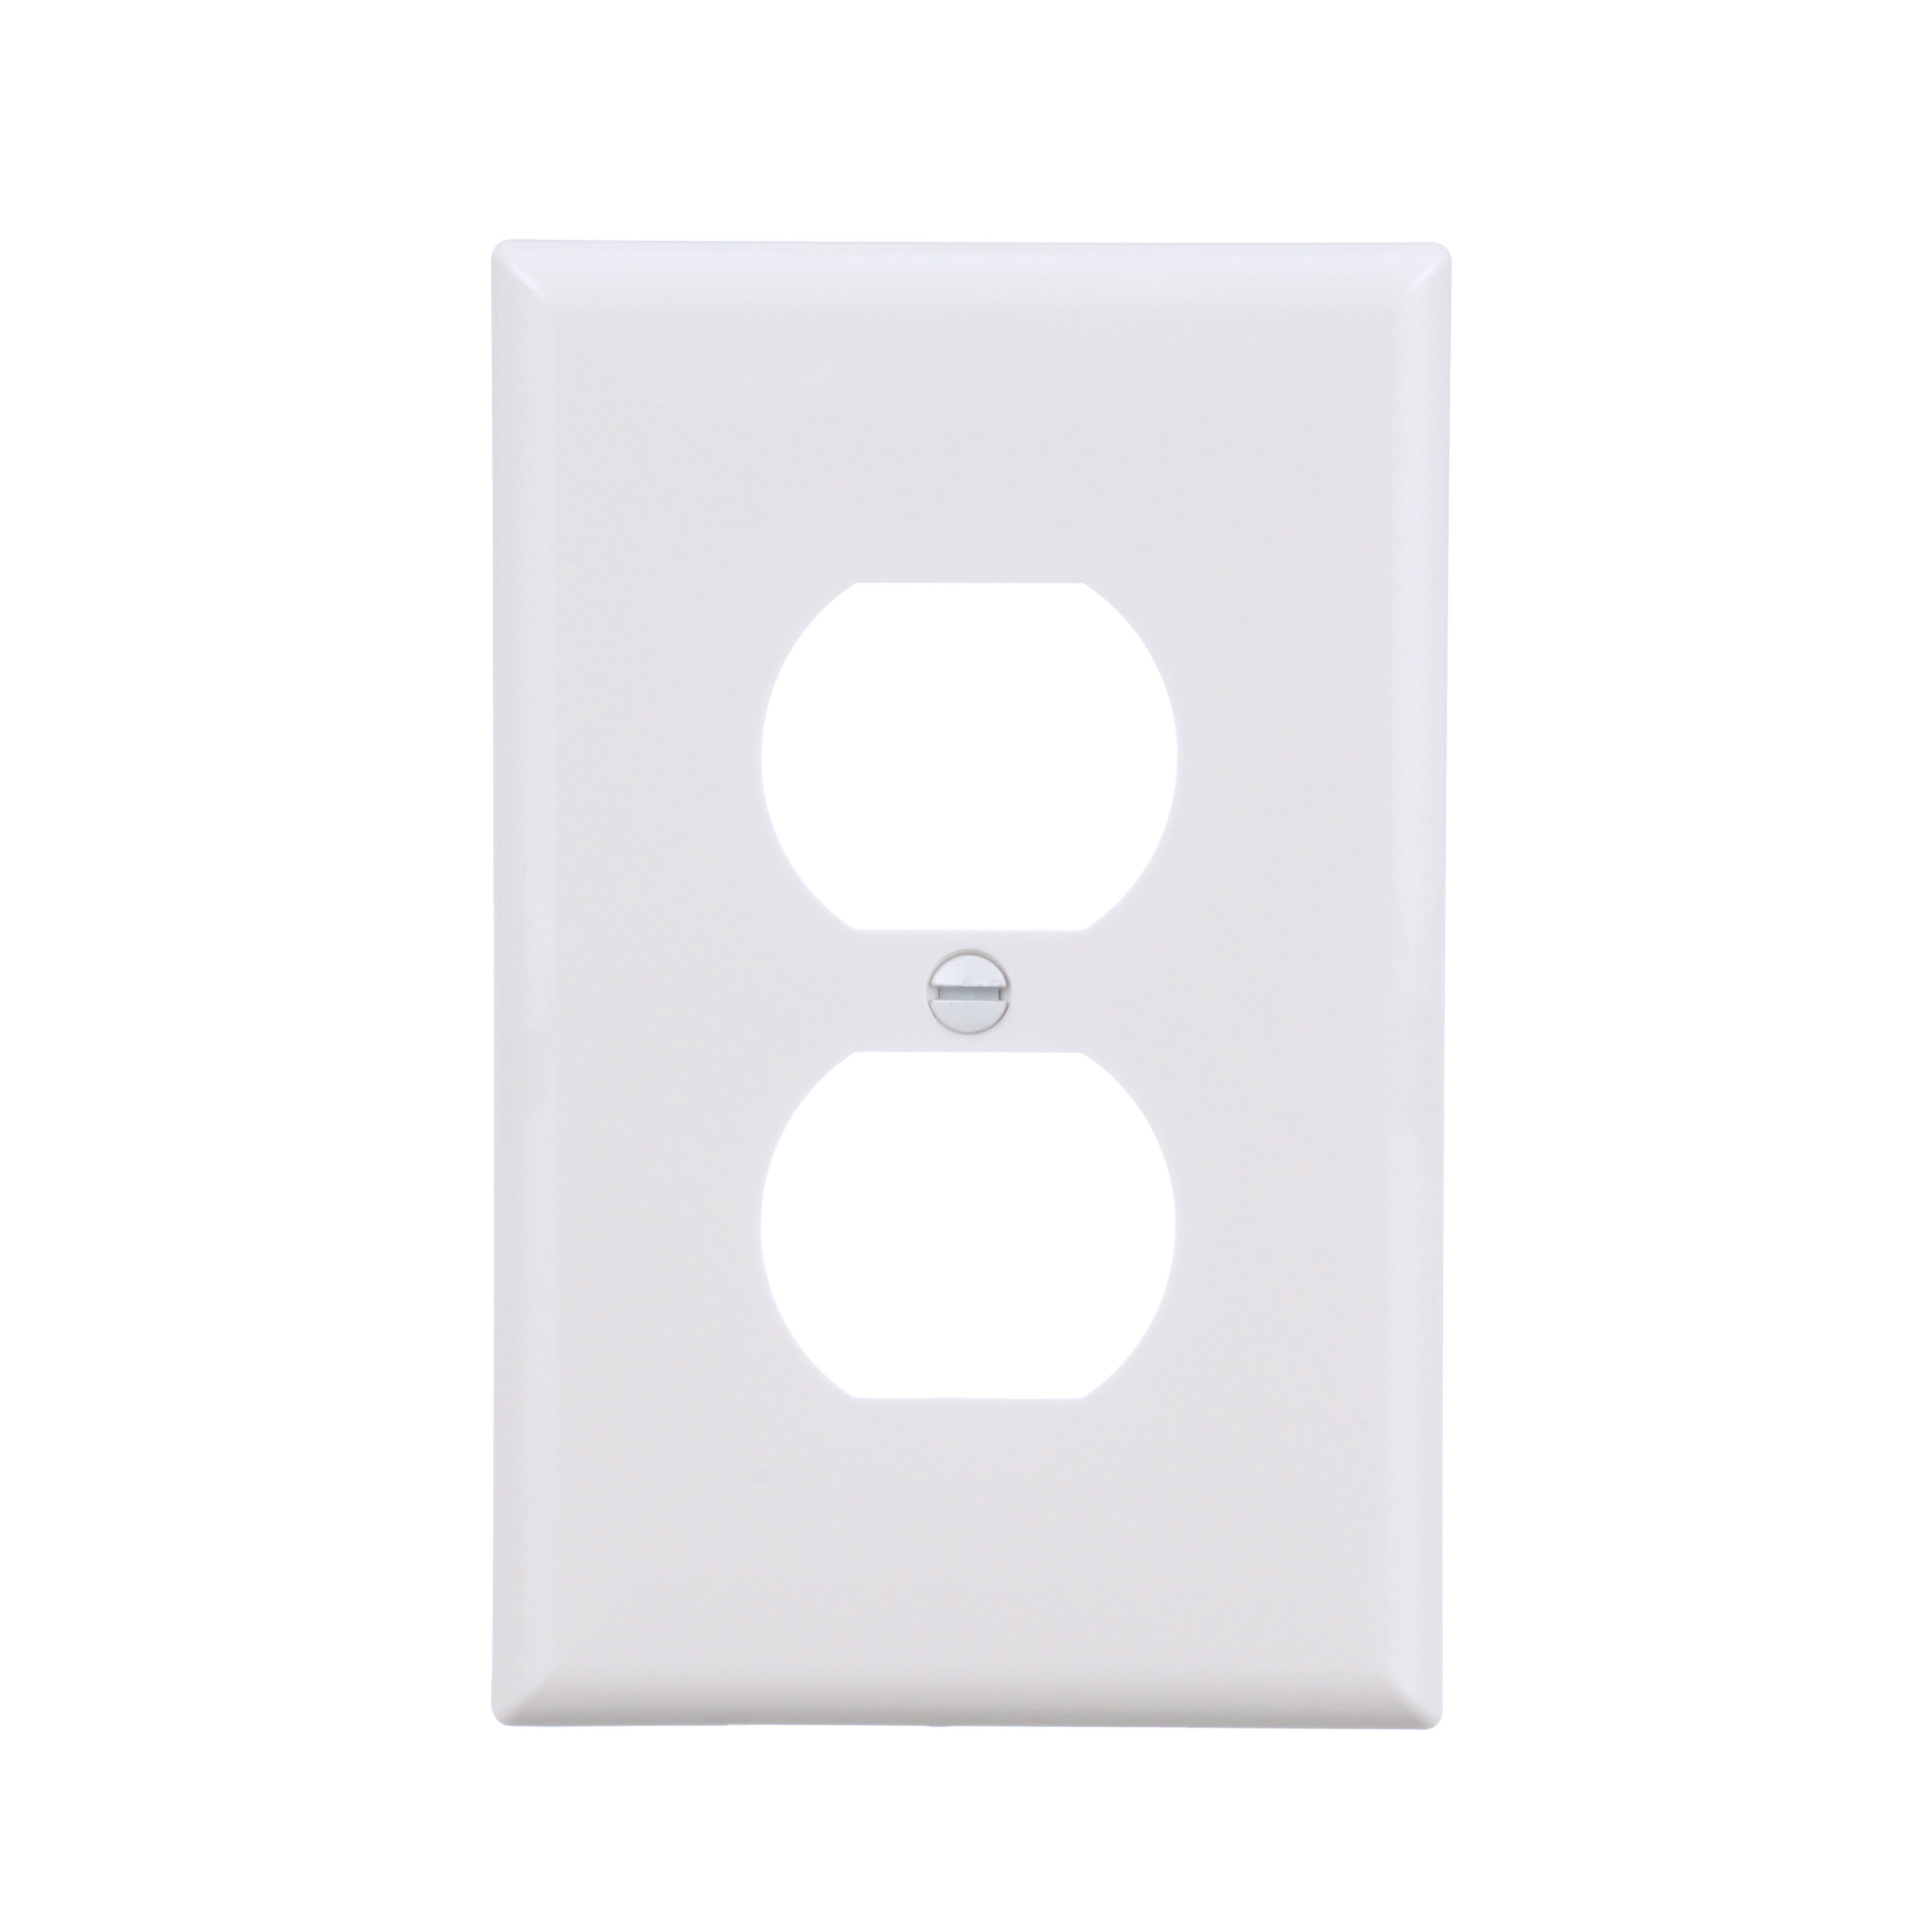 Blue Grey Duplex Electrical Outlet Wall Plate Decortive Light Switch Cover Abstract Art Wall Plate Cover Wallplates for Bedroom Kitchen Home Decor 